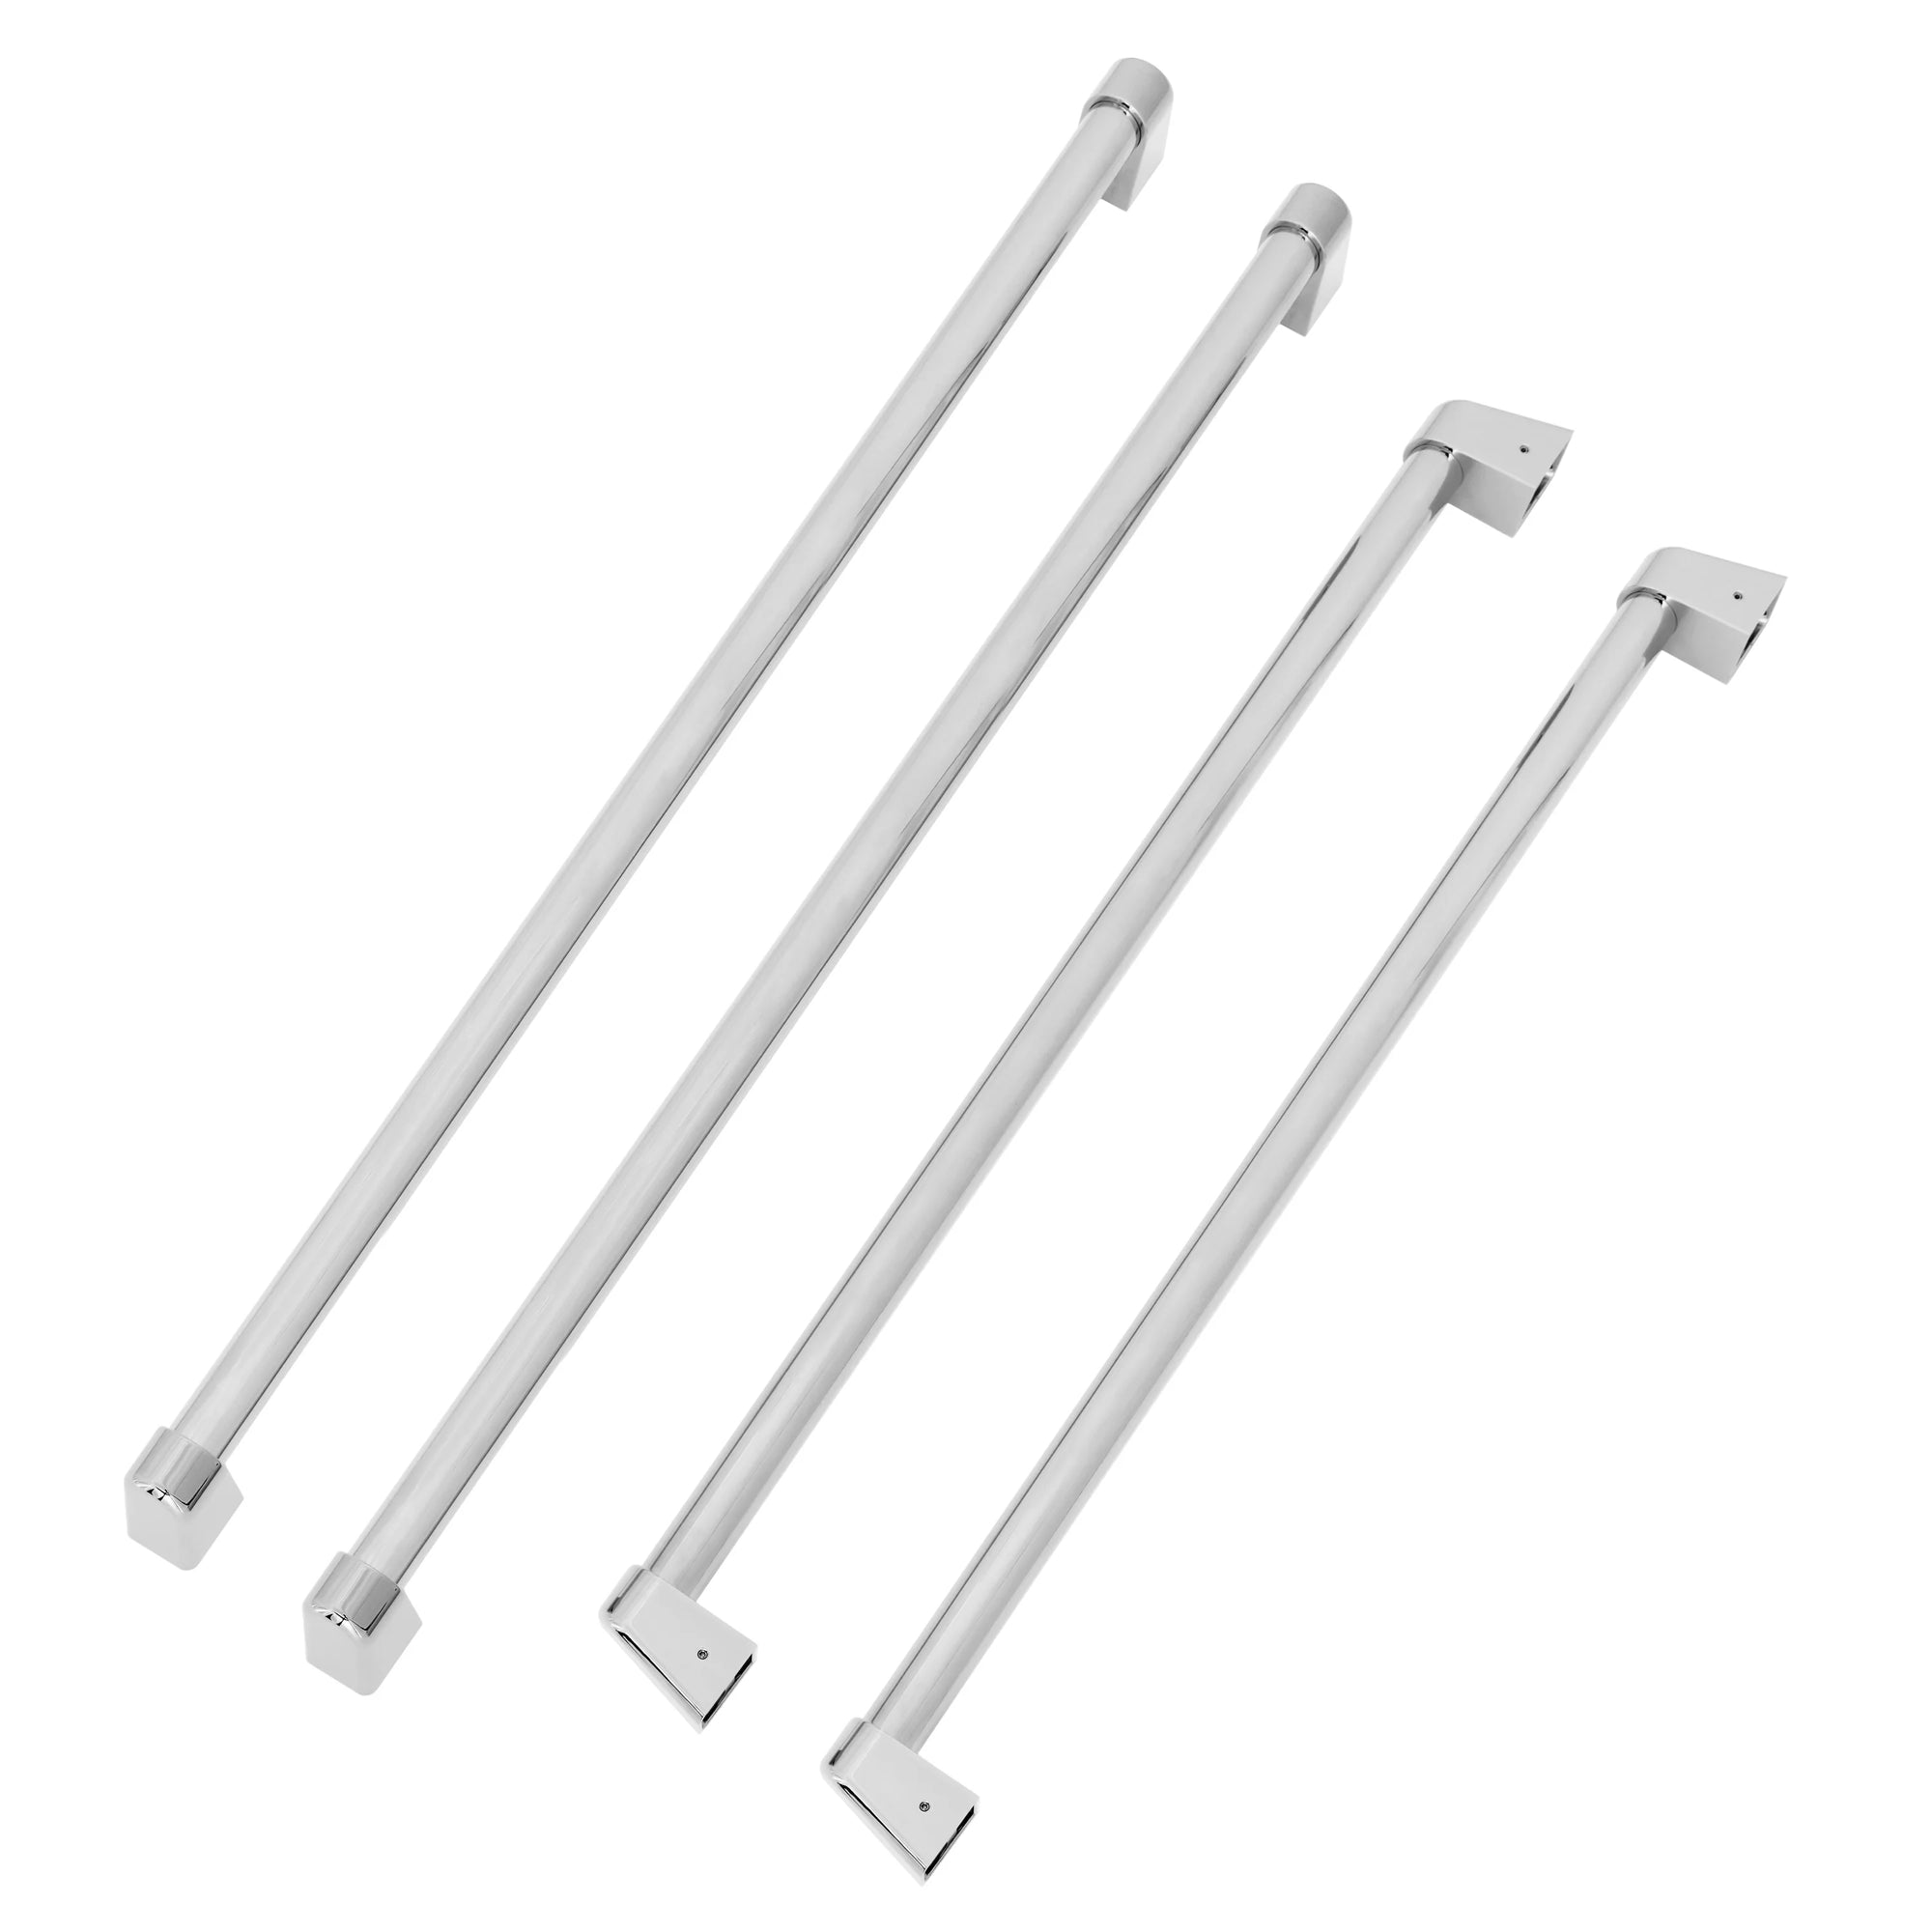 ZLINE Stainless Steel Handles for 60" Built-in Refrigerator (Set of 4), RBIVH-SS-60